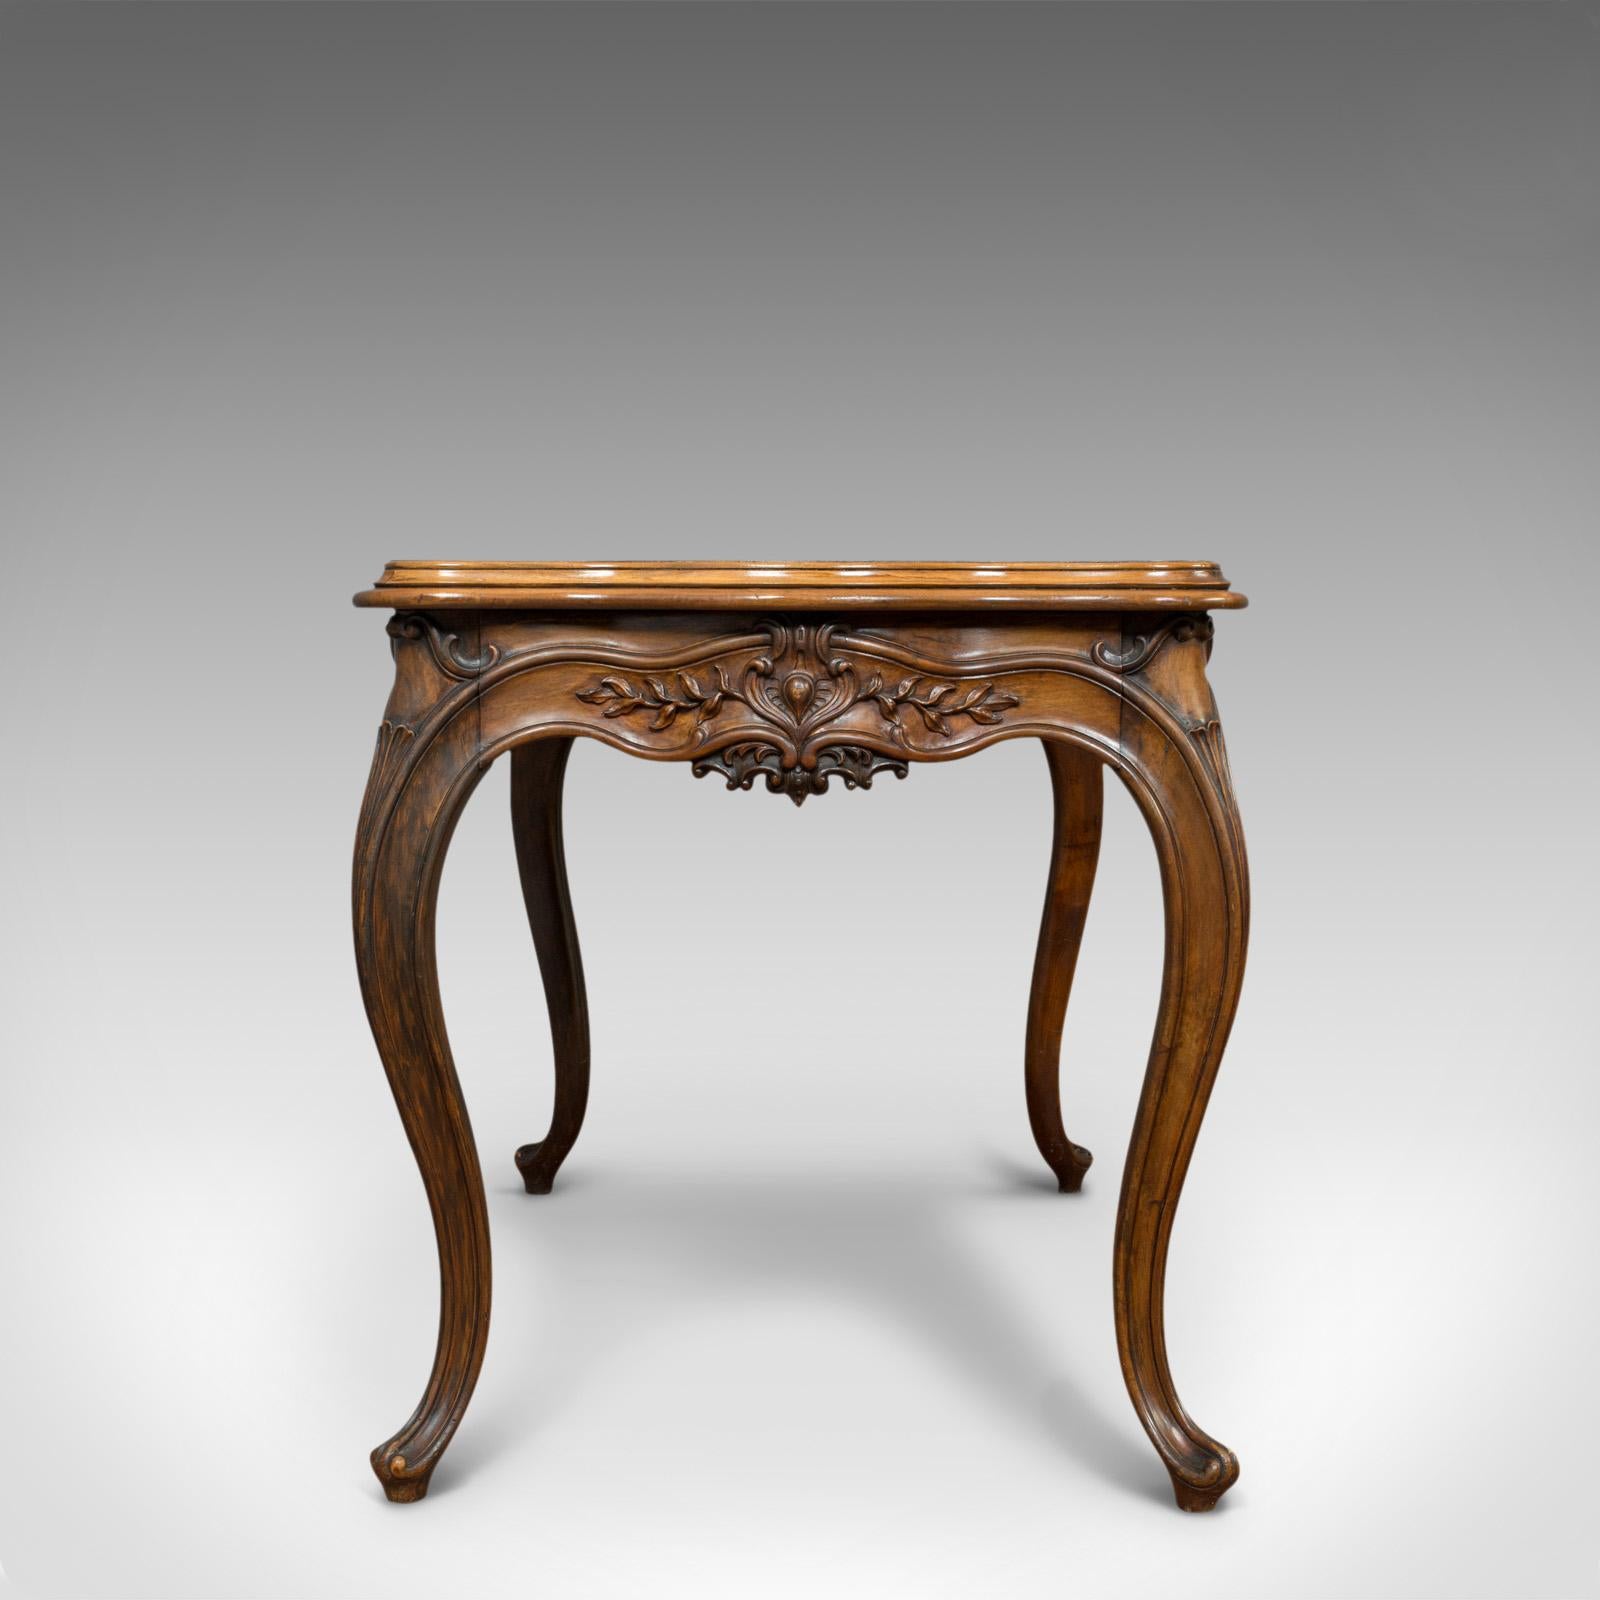 19th Century Antique Centre Table, French, Walnut, Serpentine, Occasional, Louis XV Taste